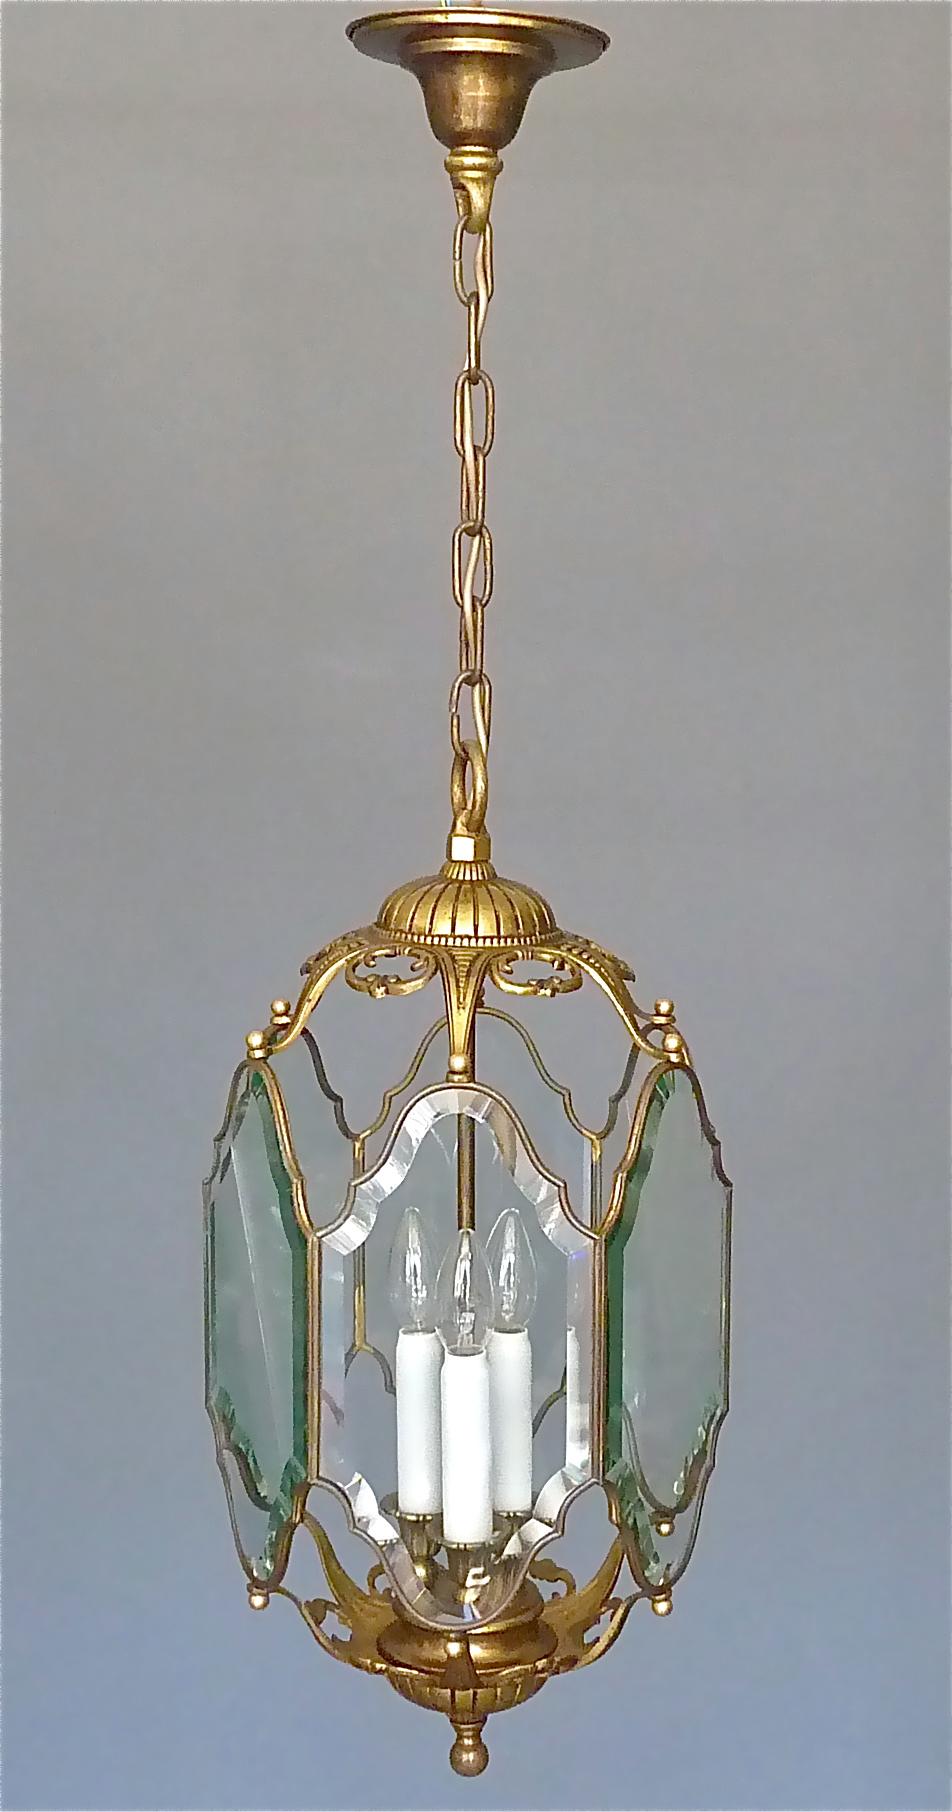 Large Antique French Lantern Lamp Faceted Crystal Glass Bronze Brass 1880 - 1900 For Sale 8